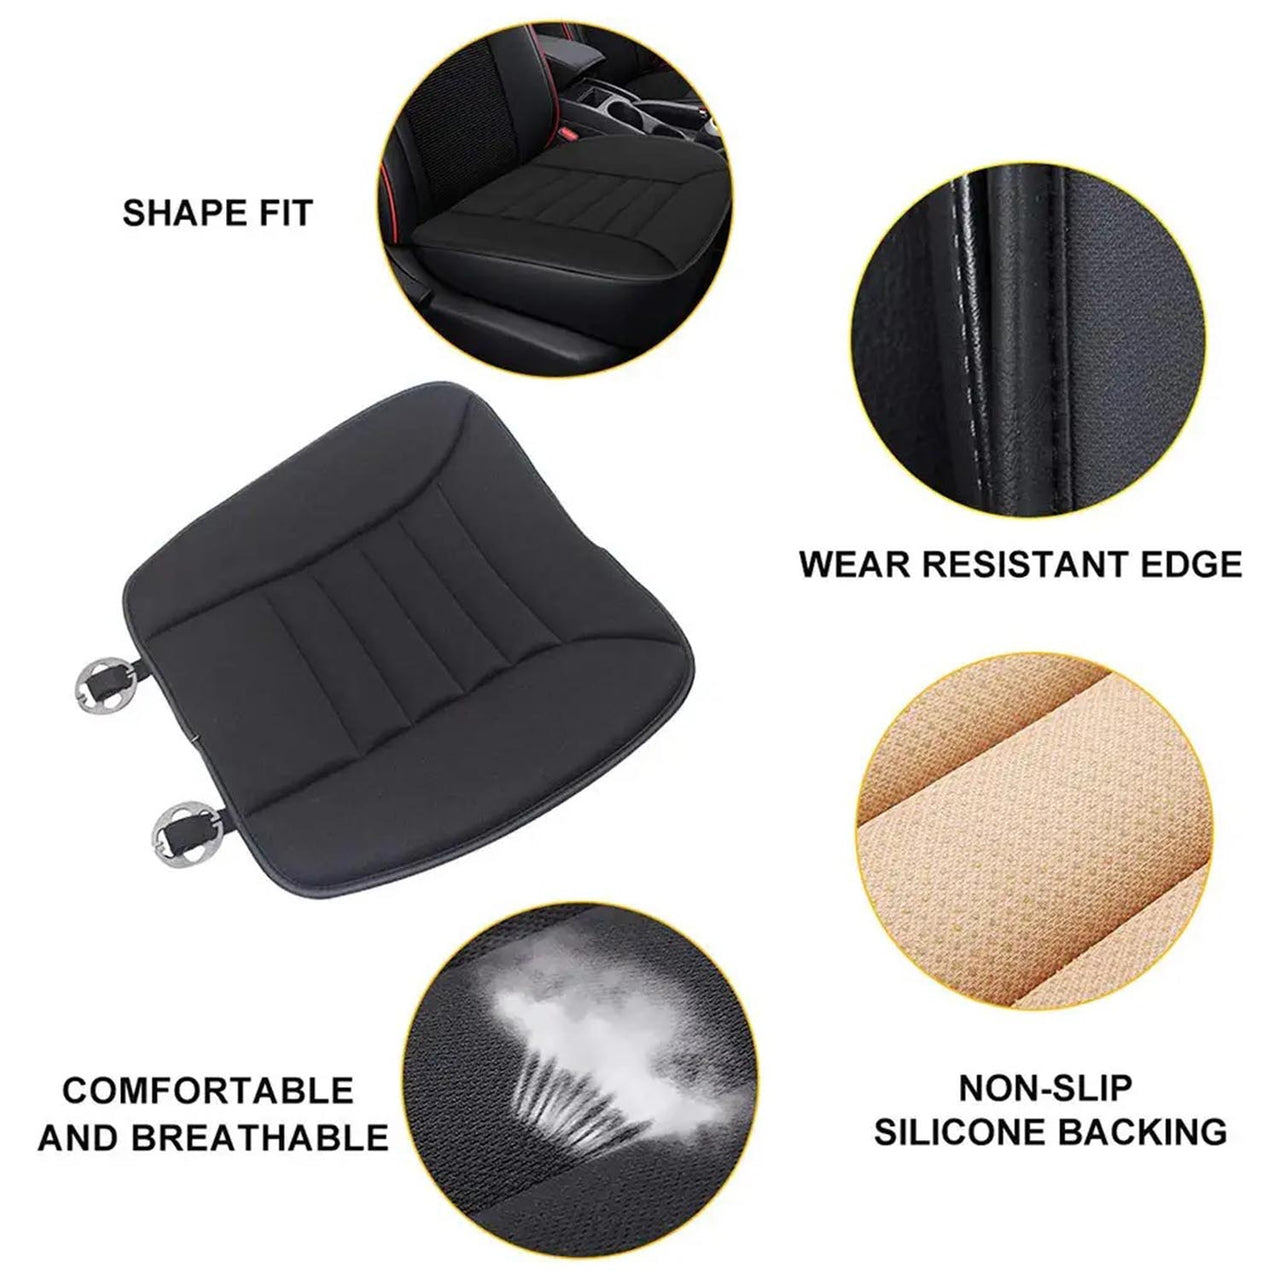 Car Seat Cushion with 1.2inch Comfort Memory Foam, Custom Logo For Your Cars, Seat Cushion for Car and Office Chair UE19989